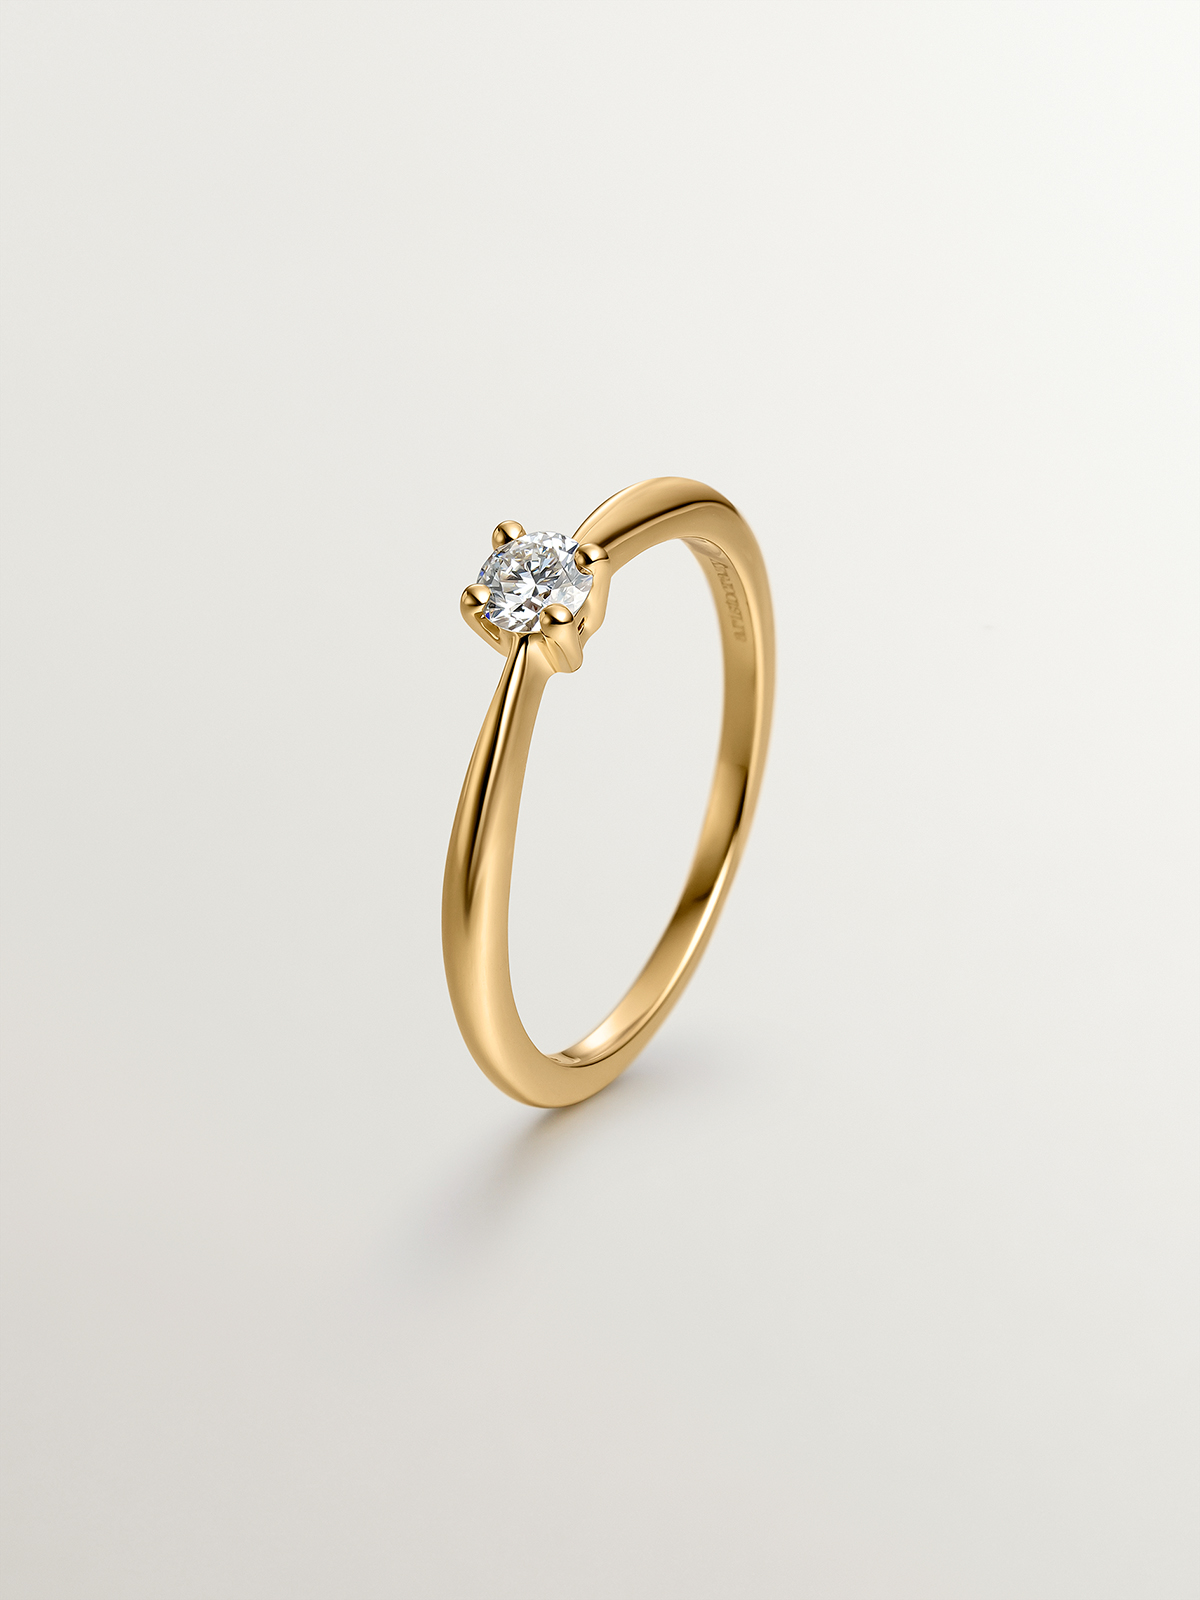 18k yellow gold solitaire ring with 0.15ct diamond